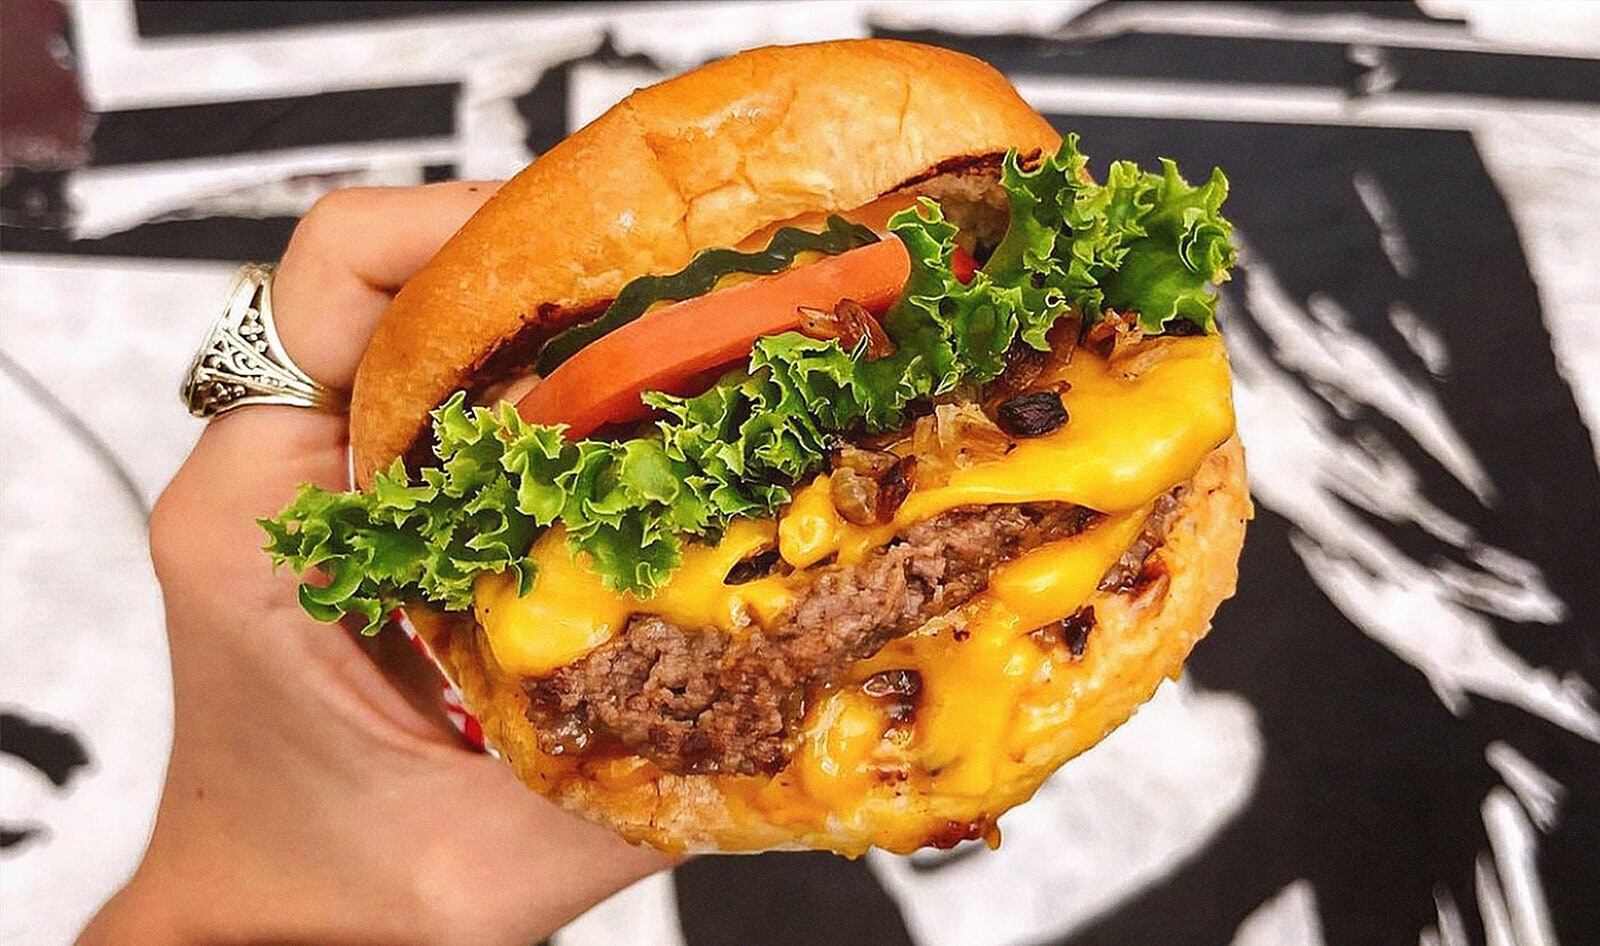 Nearly 20 Percent of the Best Burgers in the US Are Meatless, Says Yelp